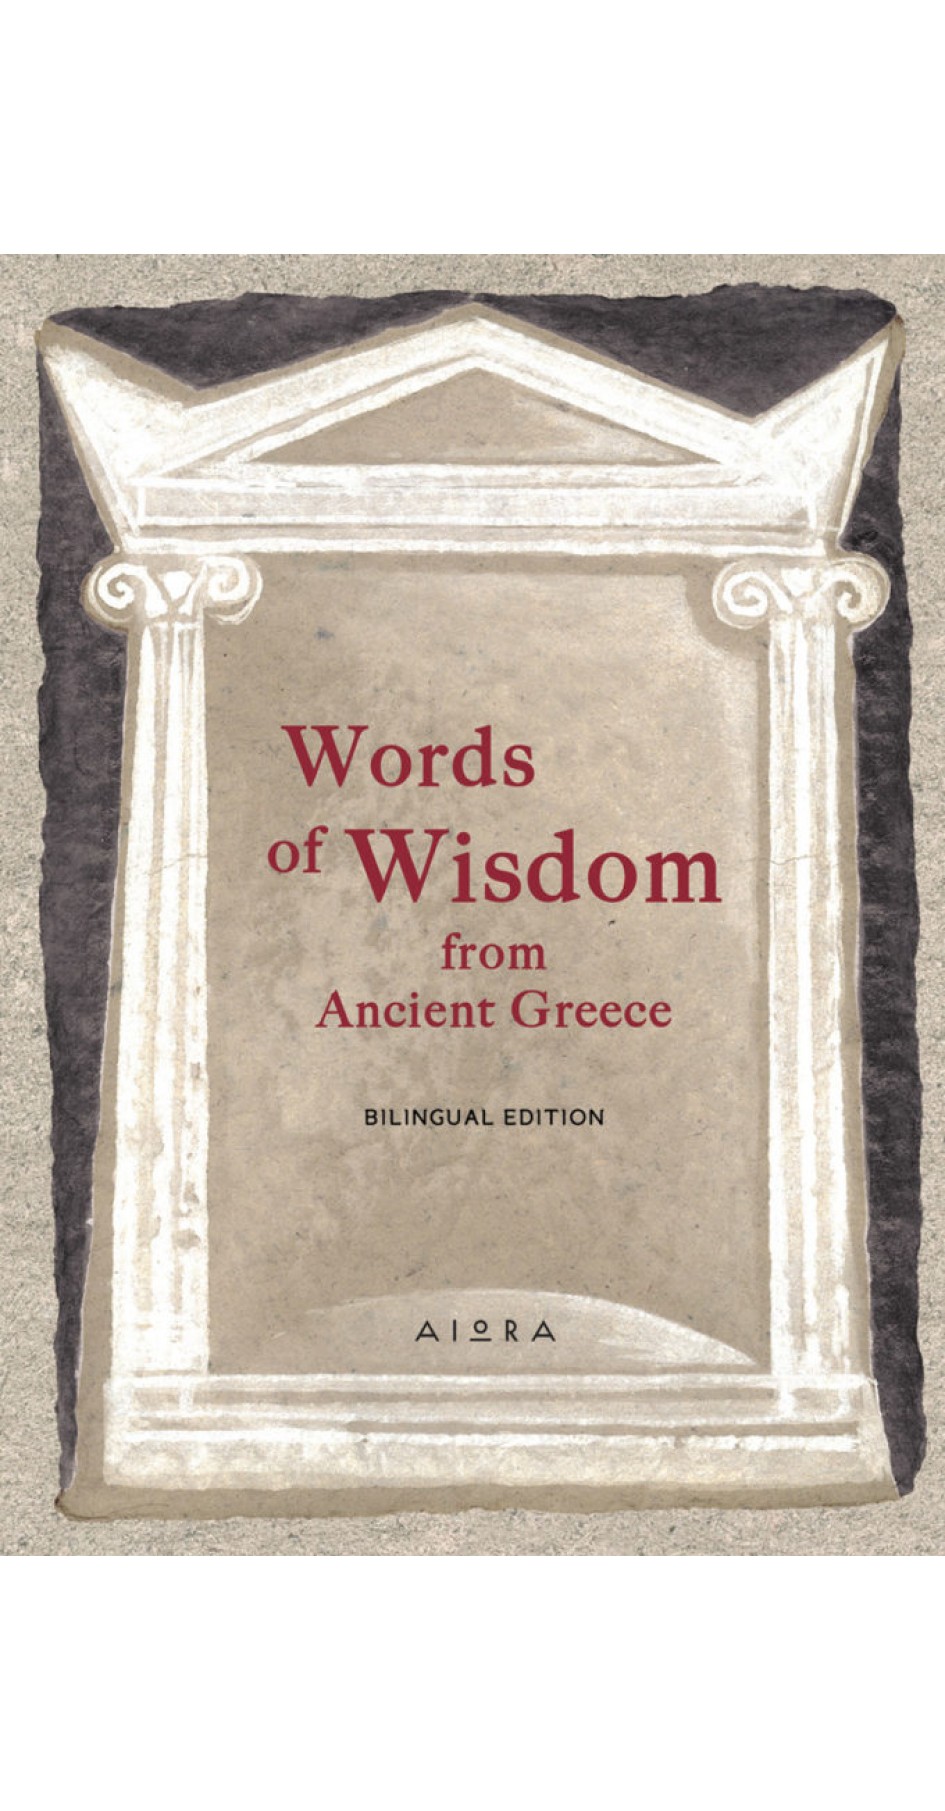 Words of Wisdom from Ancient Greece